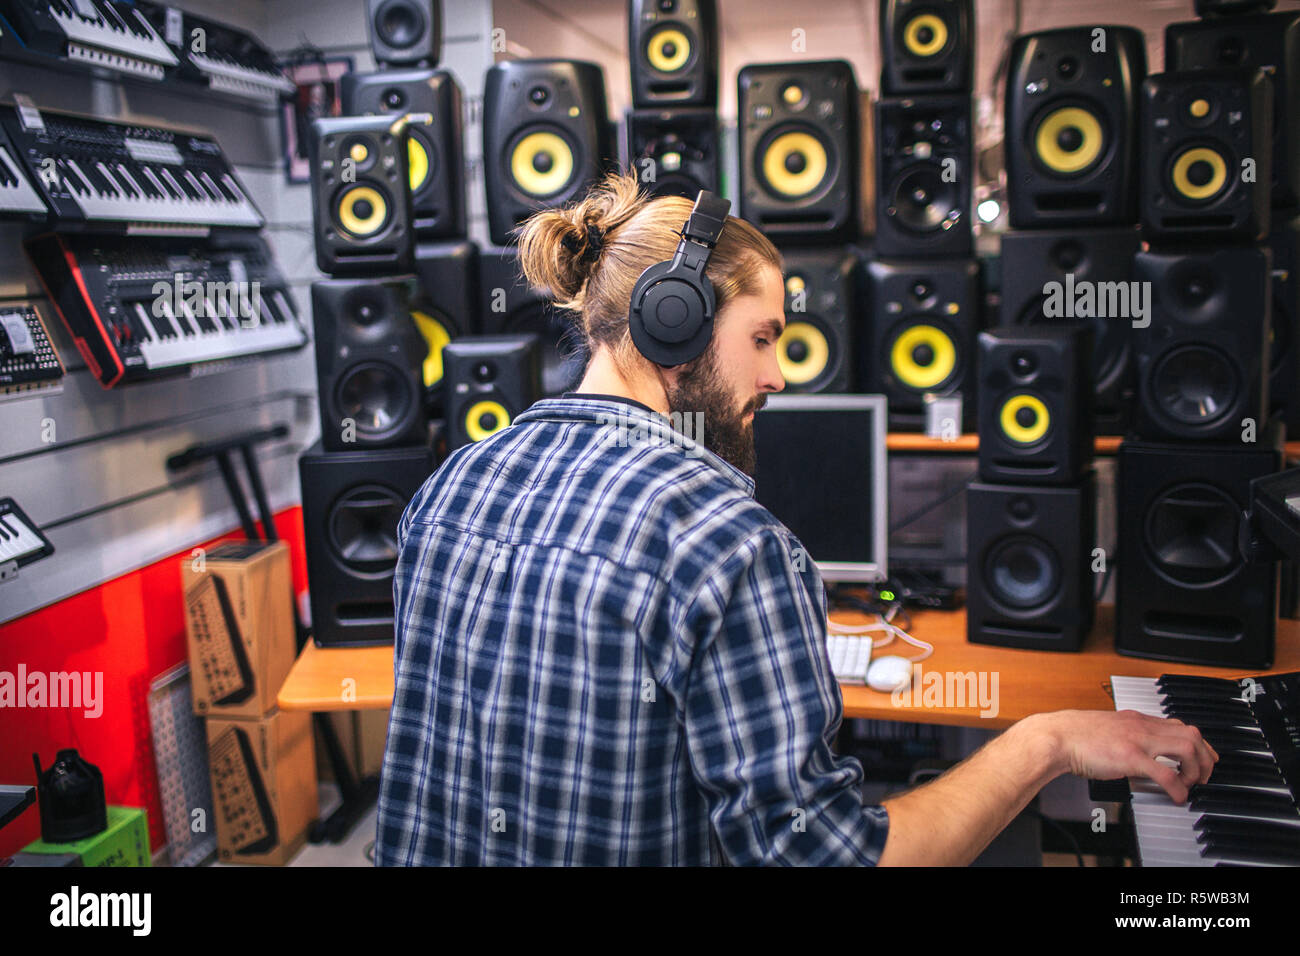 Serious and concentrated oyung man creating music in studio. He records  music by playing on keyboard. Hipster work at computer as well. Manu sound  spe Stock Photo - Alamy